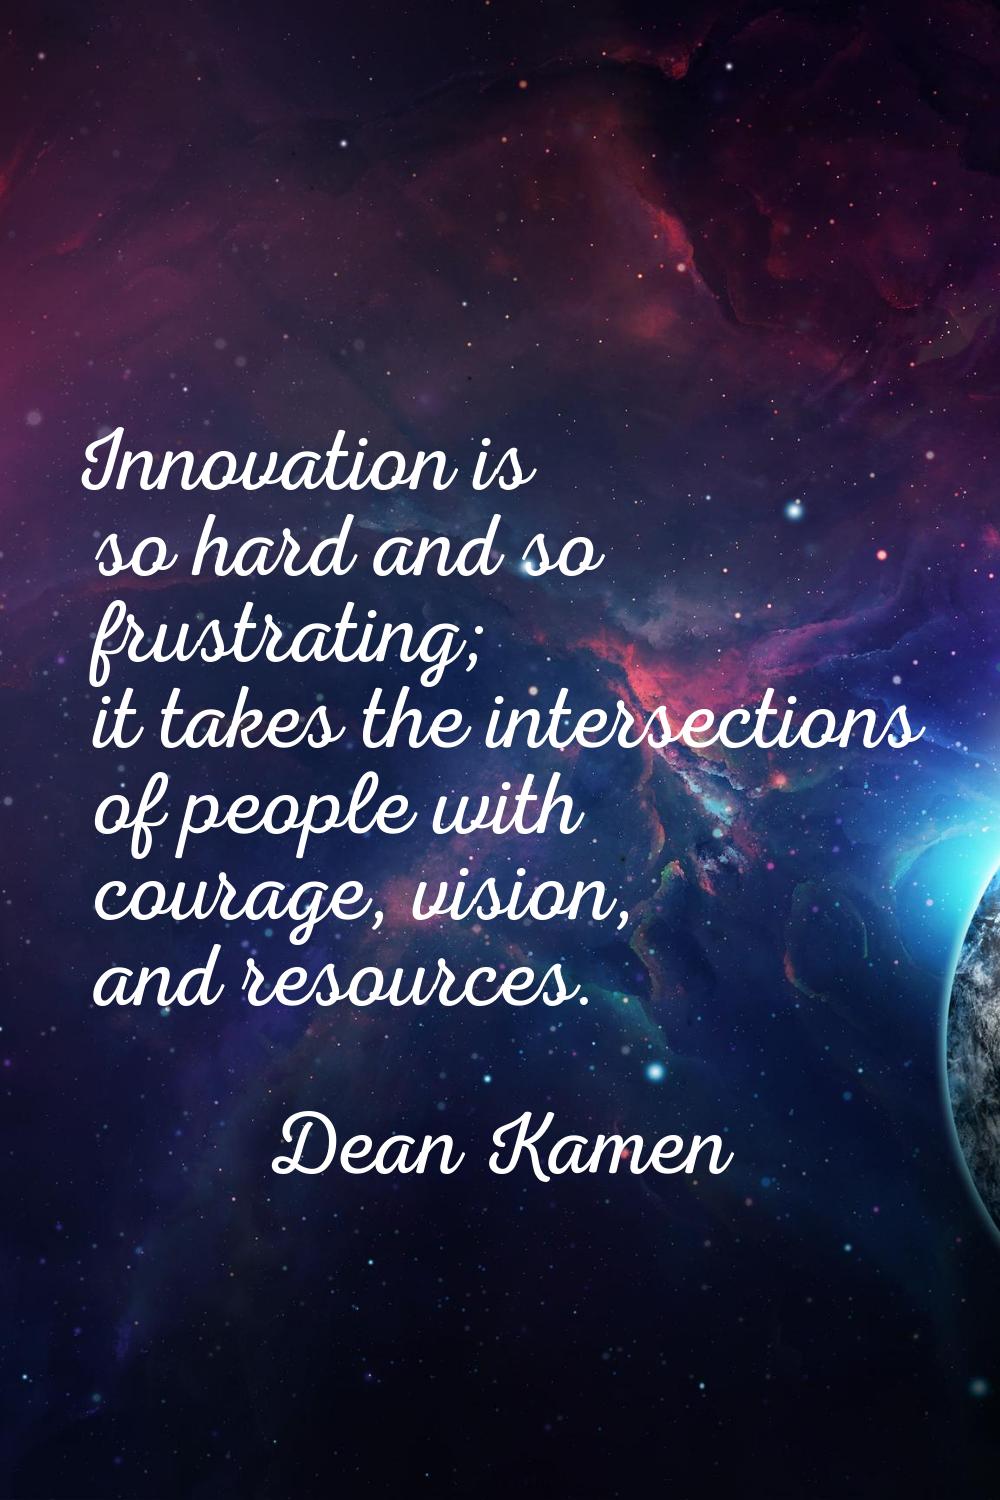 Innovation is so hard and so frustrating; it takes the intersections of people with courage, vision